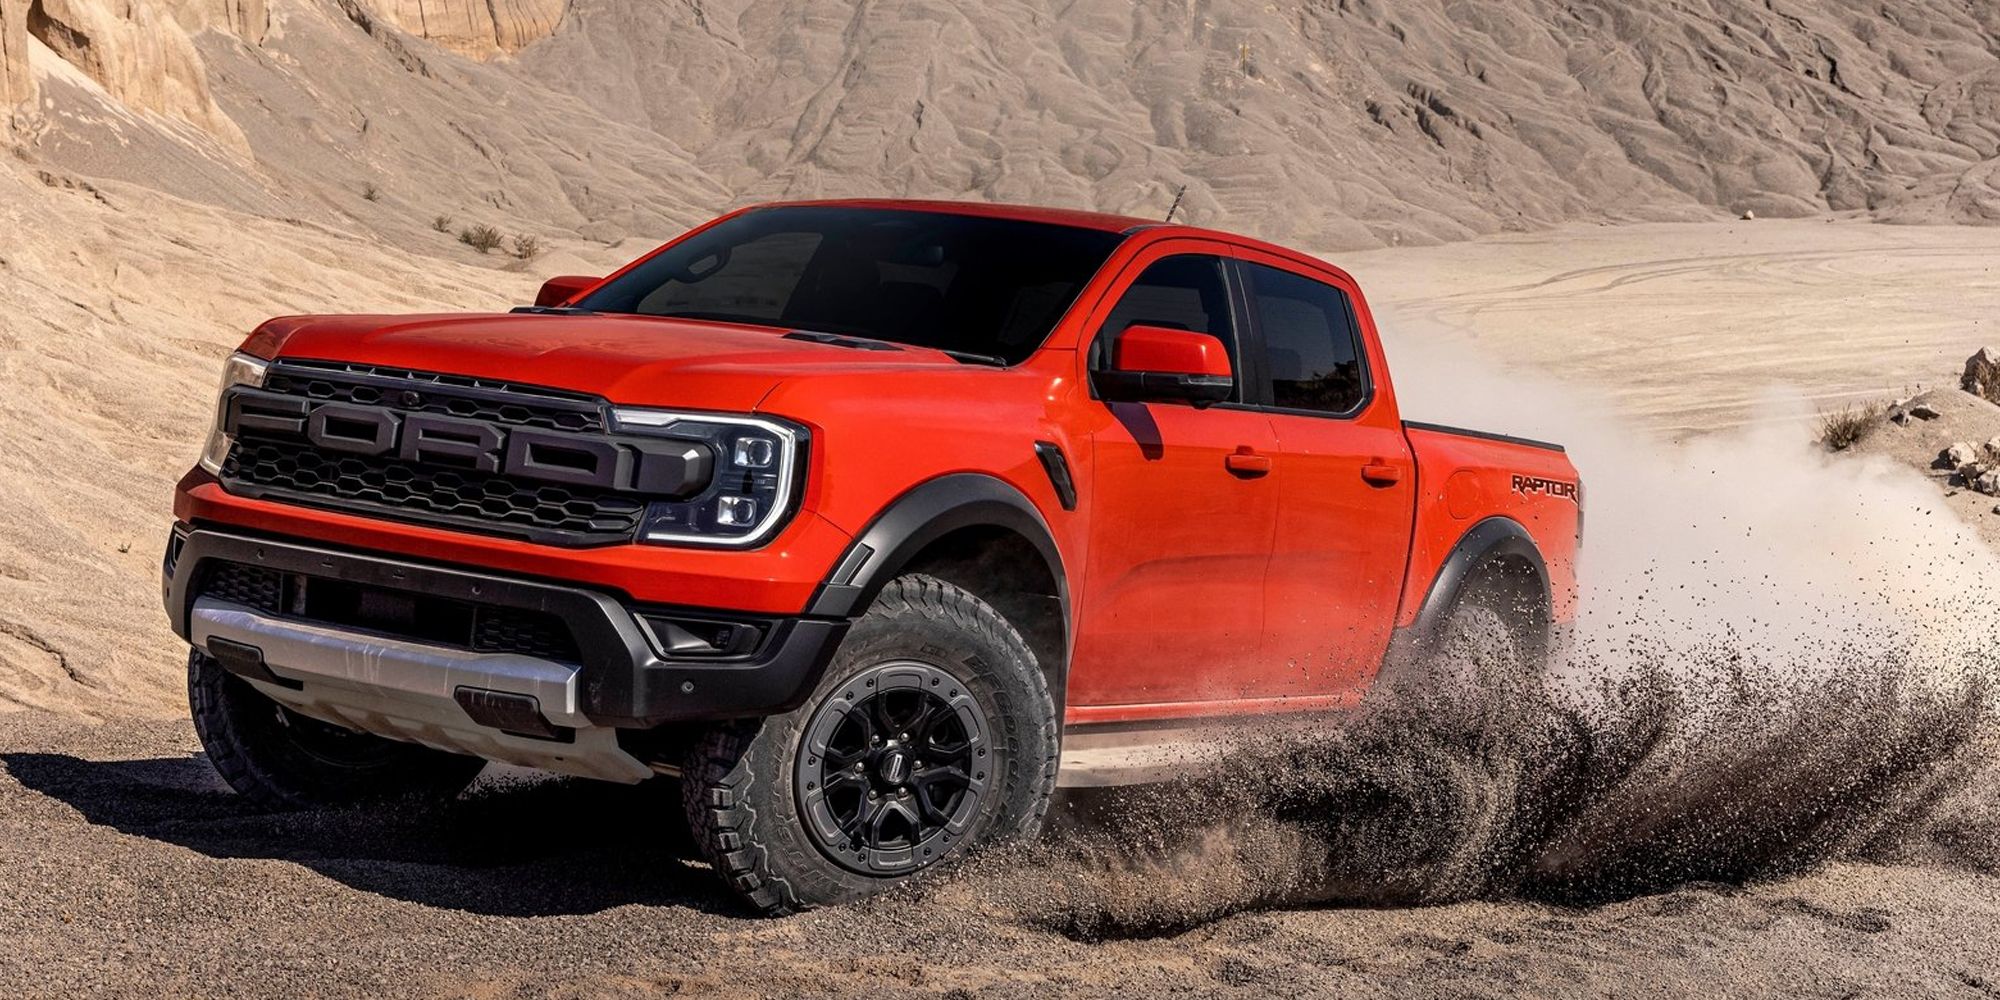 Reasons Why We're Excited About The 2023 Ford Ranger Raptor